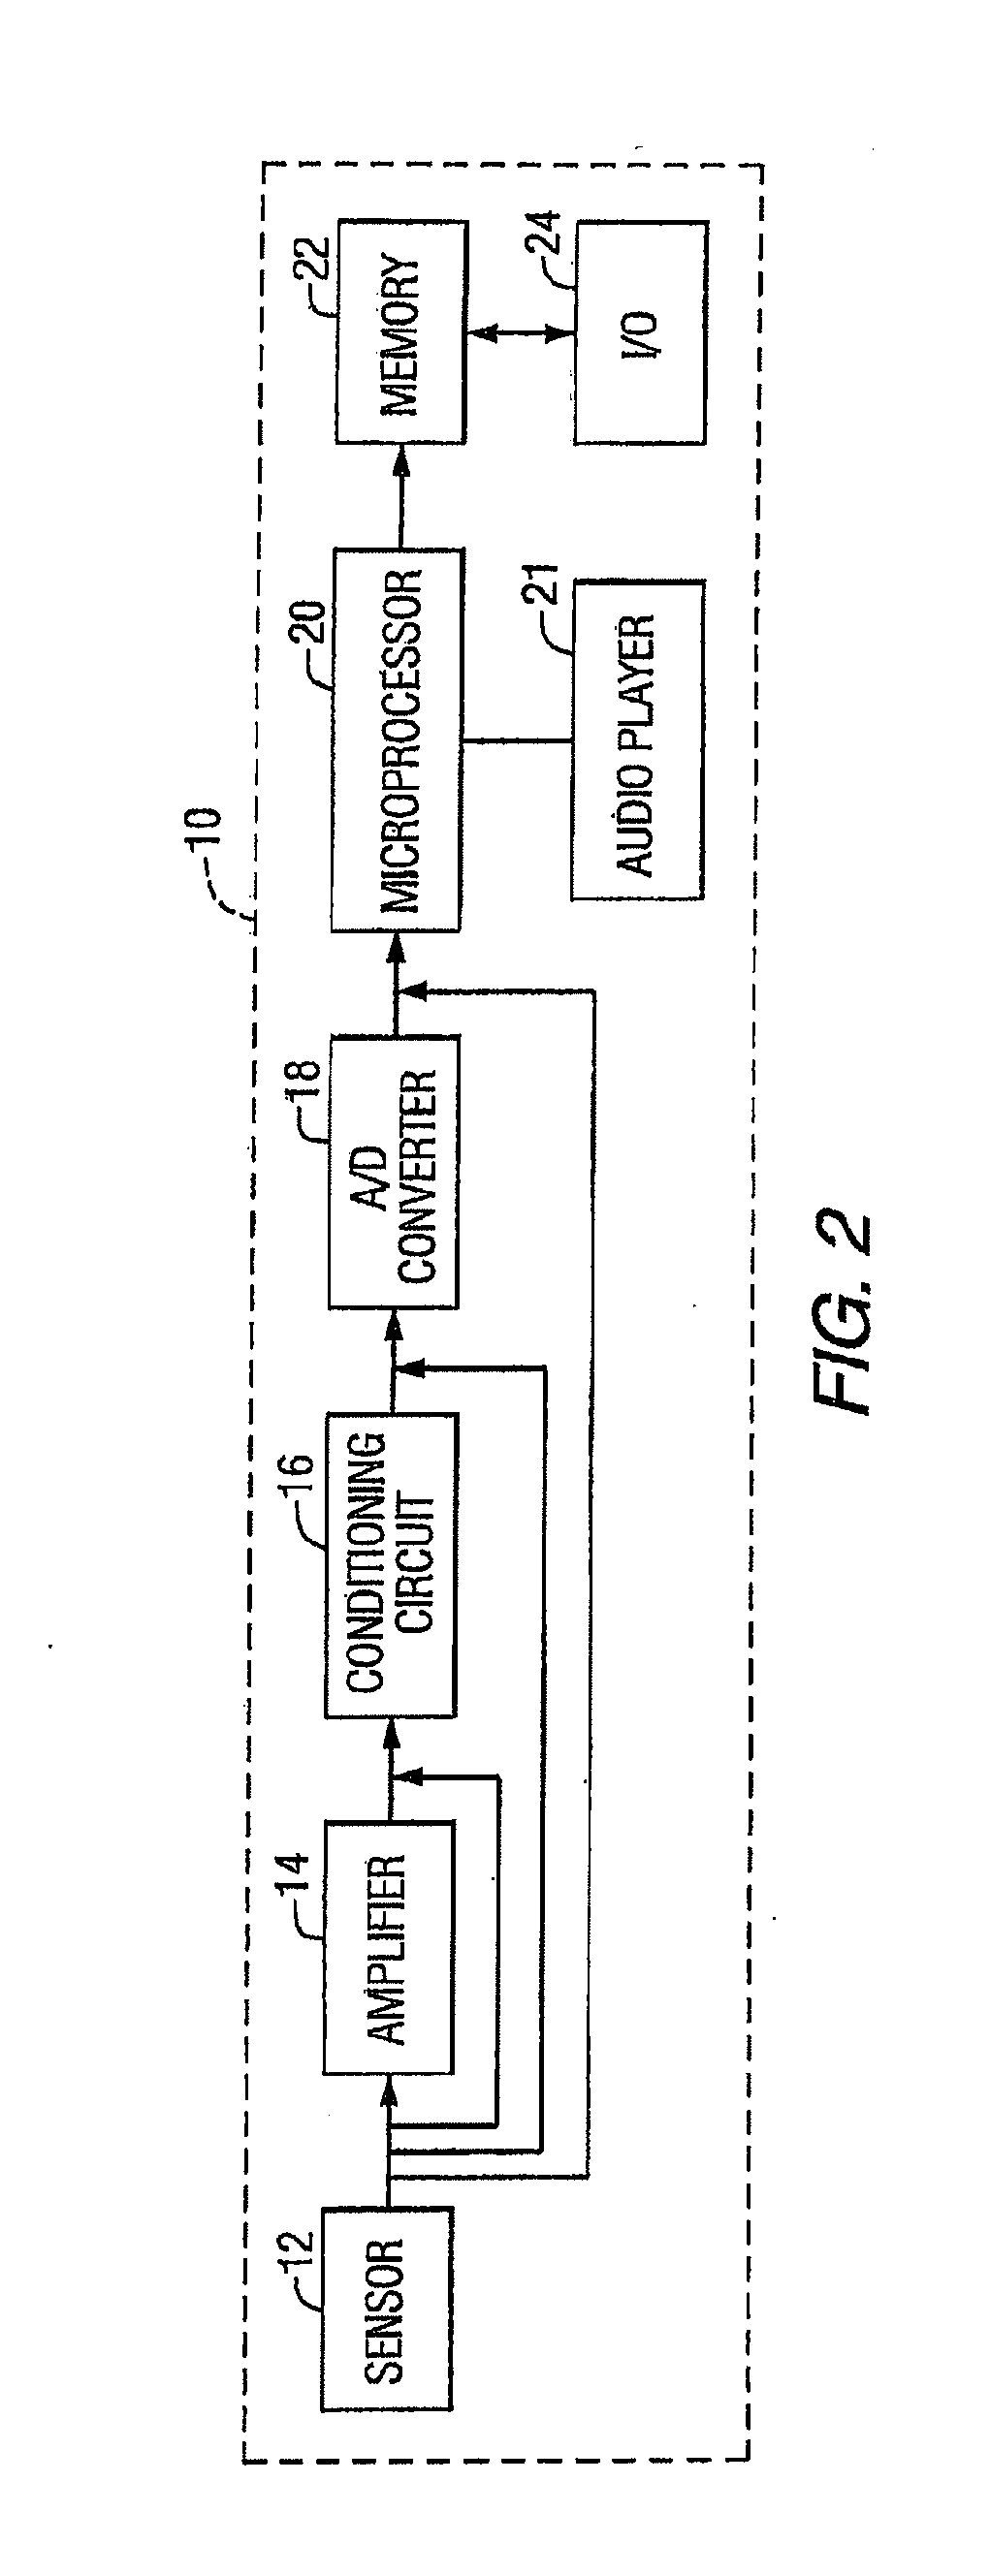 Method and apparatus for determining heart rate variability using wavelet transformation